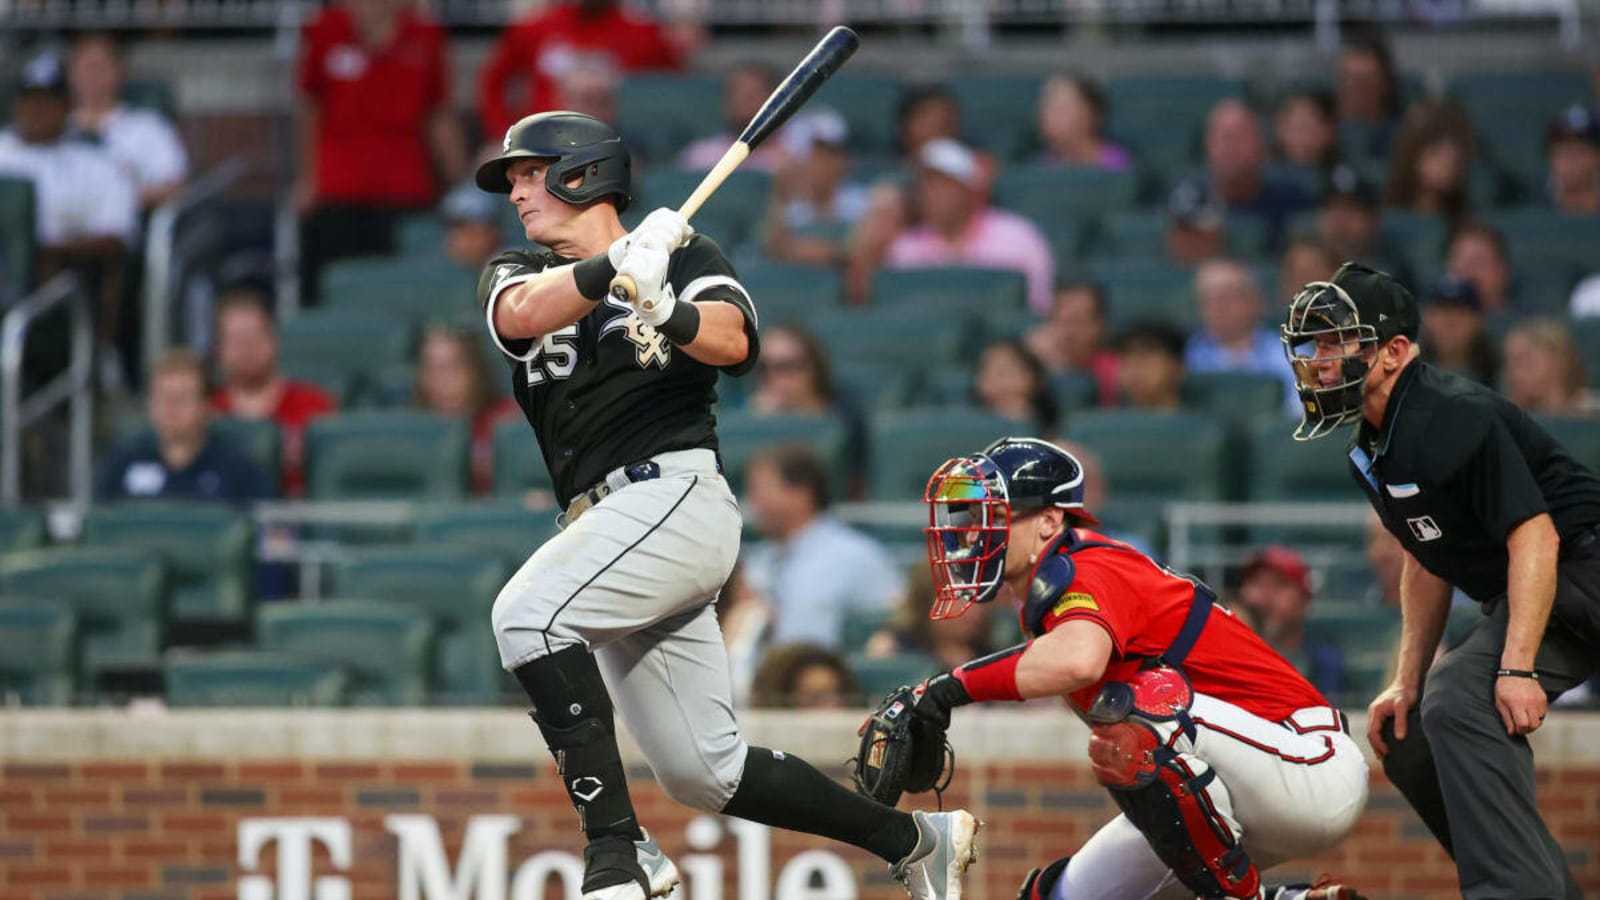 X-Rays Come Back Clean For Andrew Vaughn, Chicago White Sox 1B Now Day-to-Day